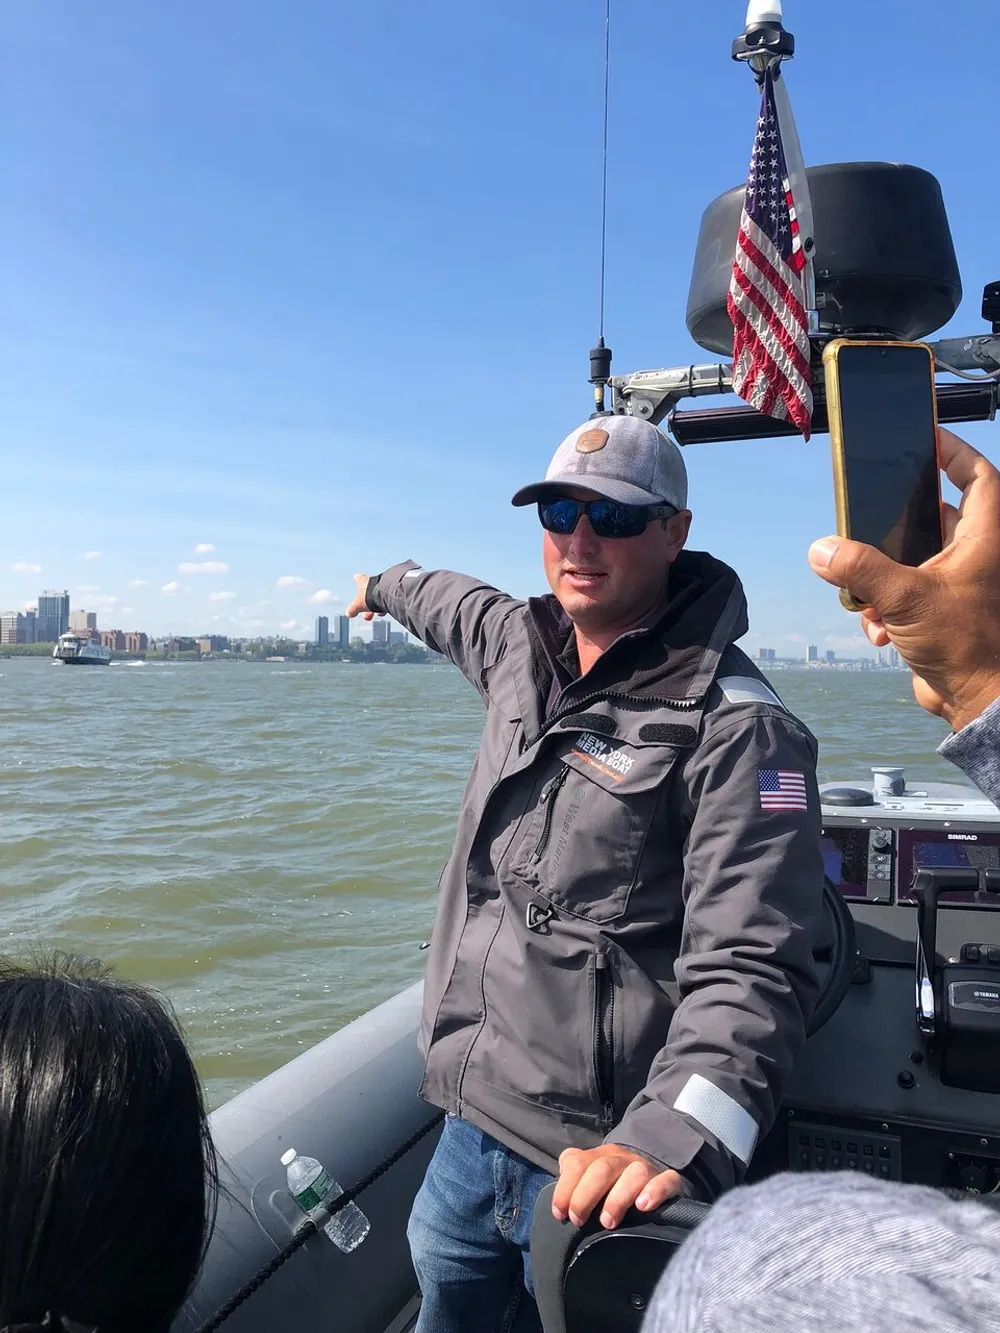 A person in sunglasses and a baseball cap is pointing towards something out of frame while on a boat as someones hand holds a smartphone possibly capturing a picture or video with an American flag prominently displayed in the background